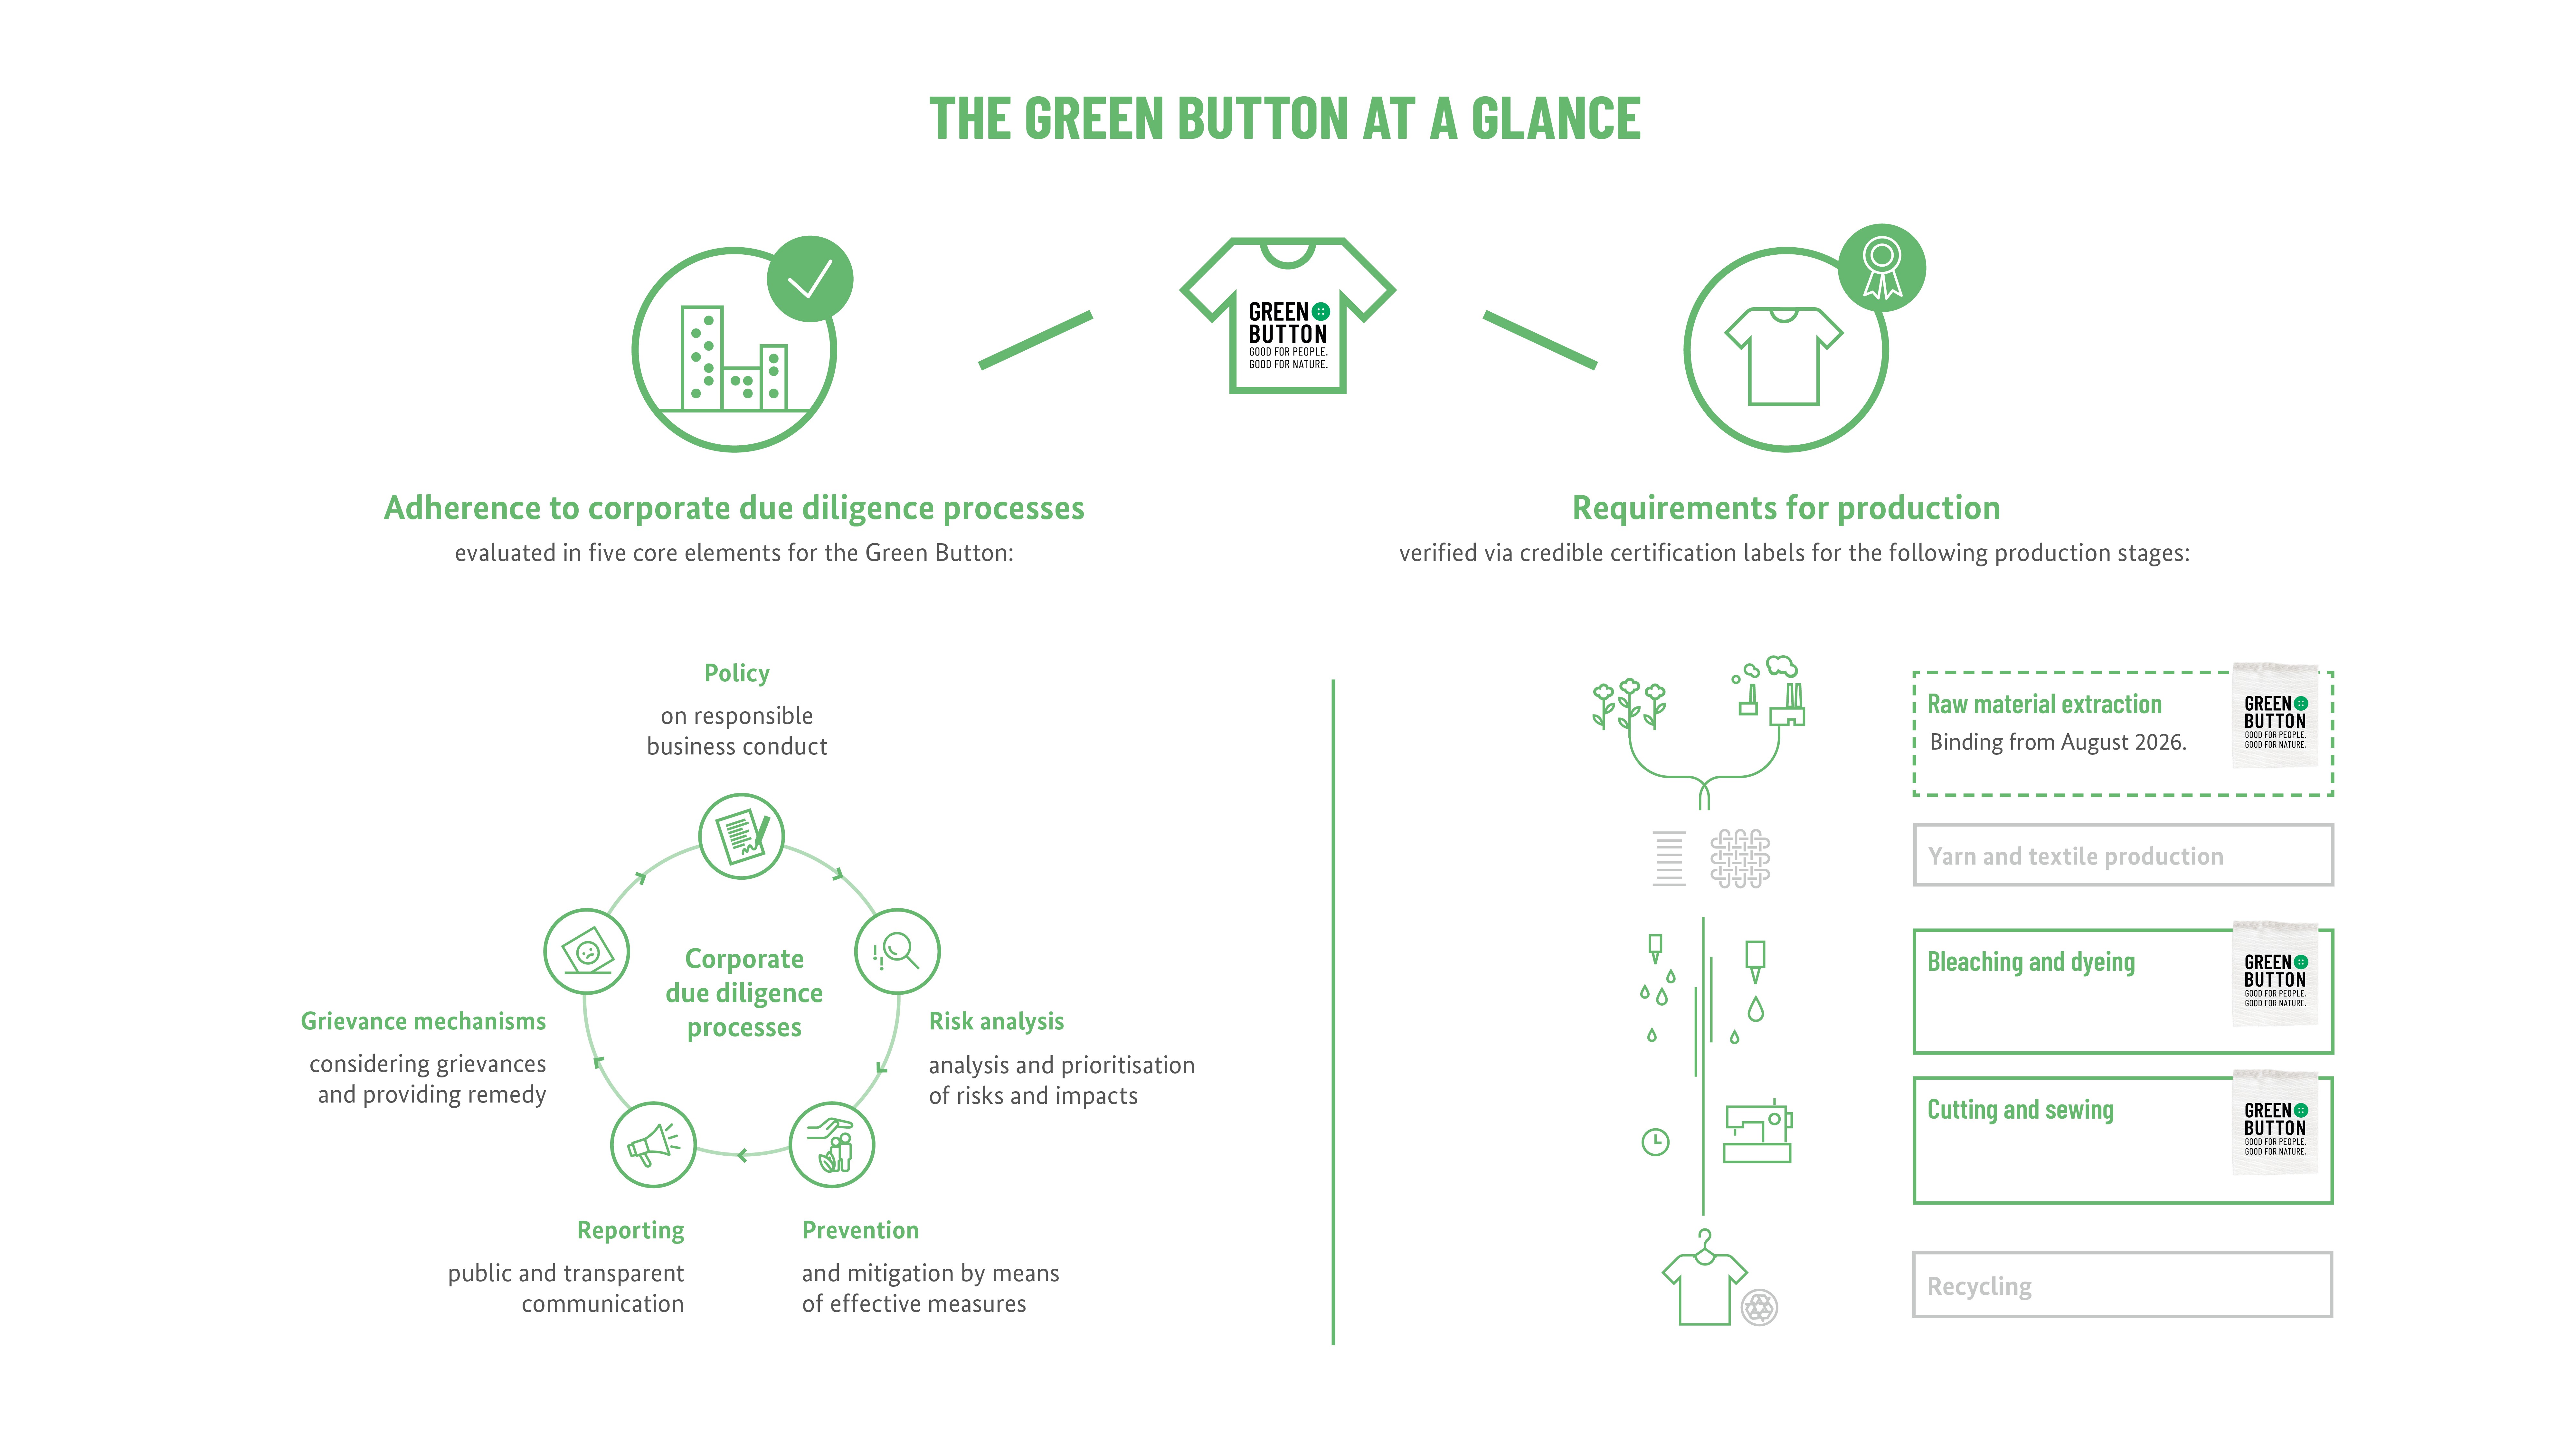 Overview of the requirements of the Green Button 